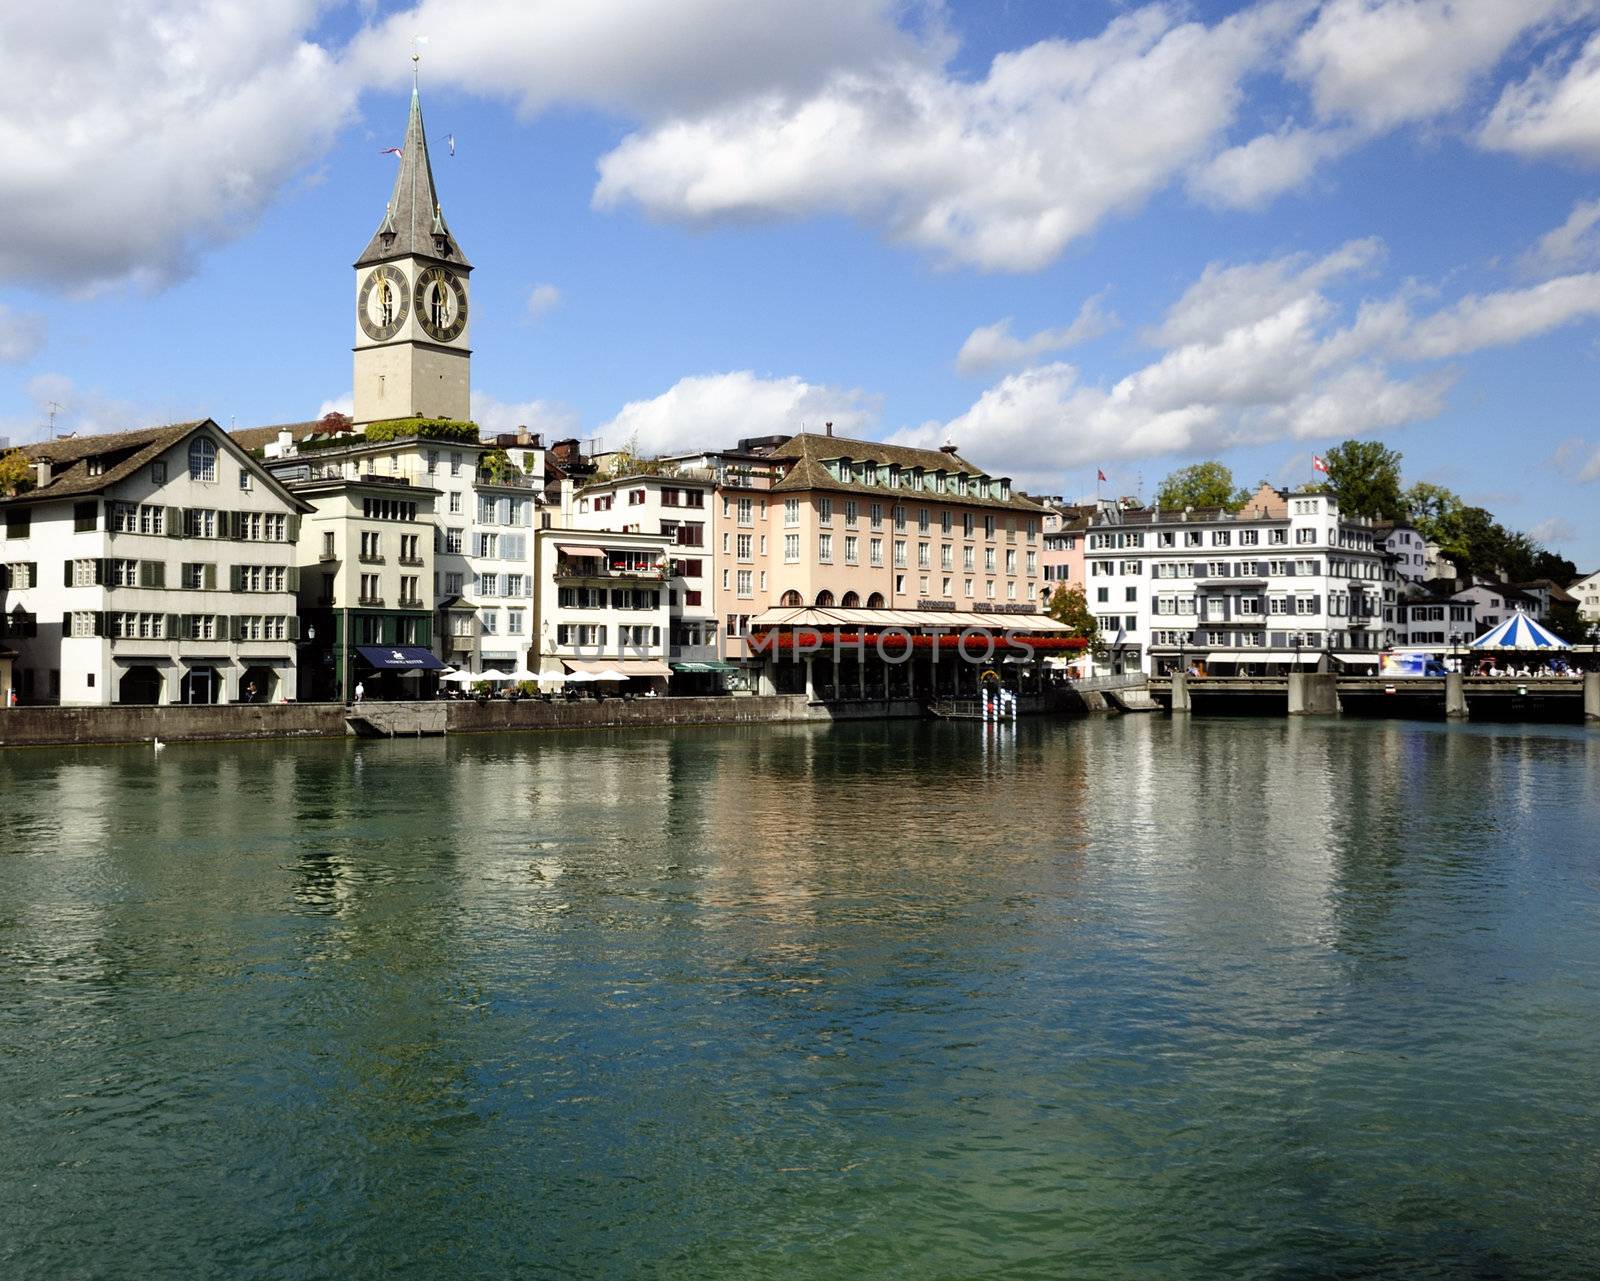 Zurich switzerland. Old town view. Historic place, and city of the bankers.